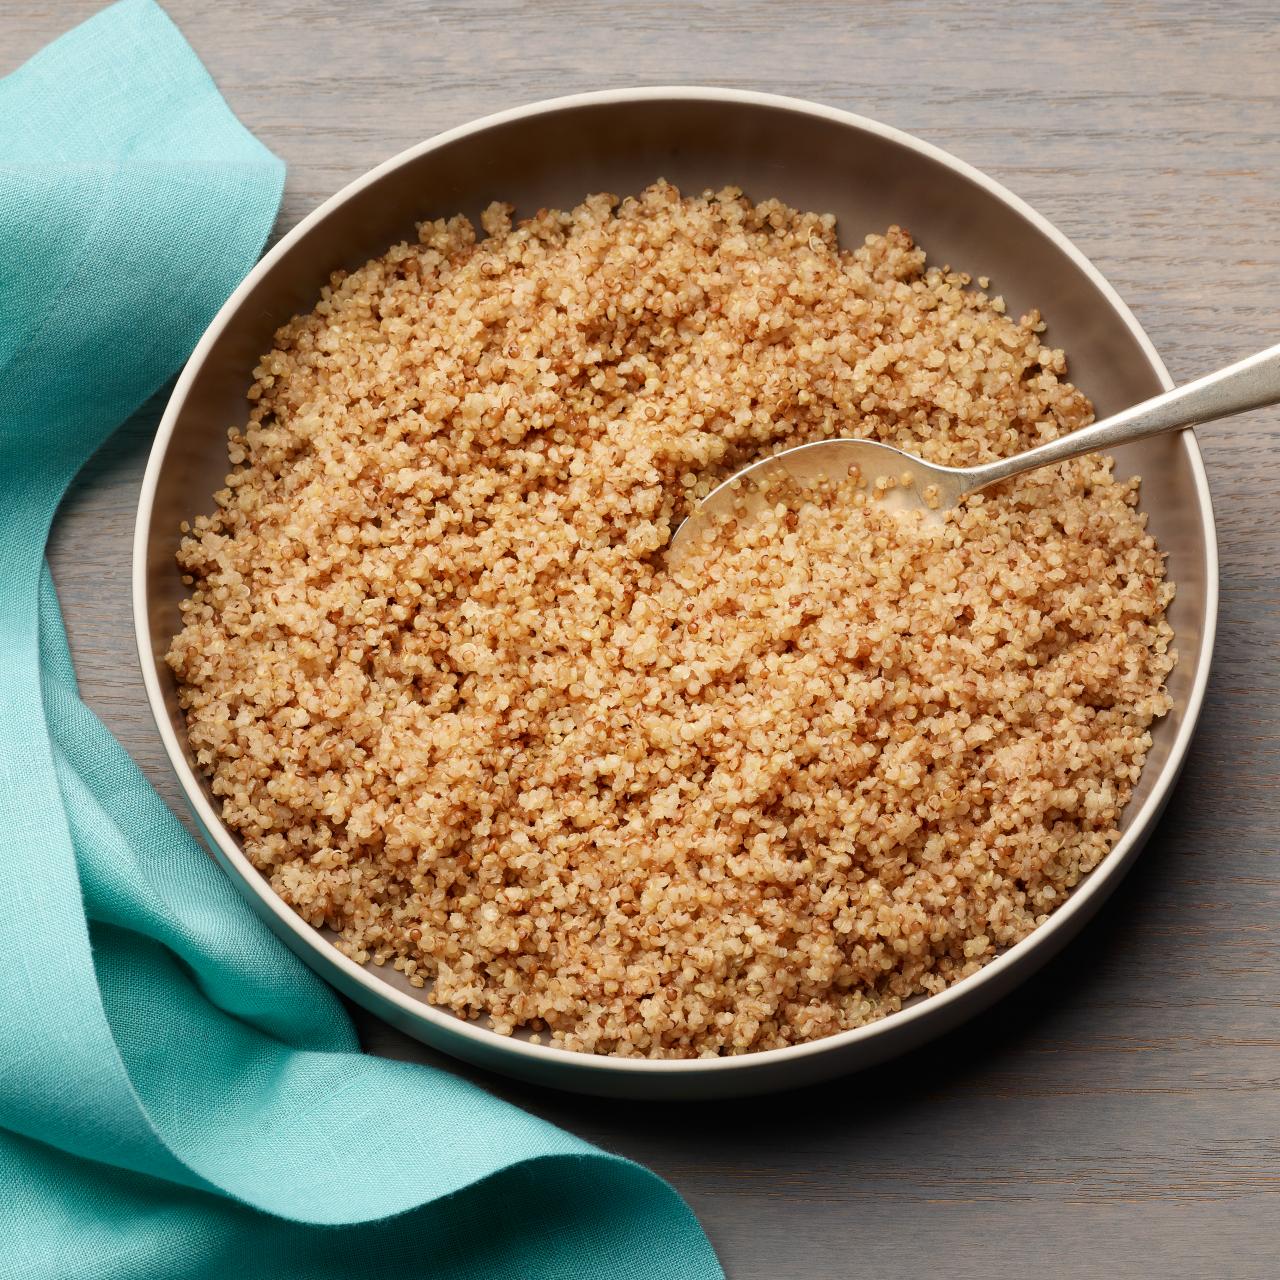 How To Cook Quinoa (Recipe and Tips)